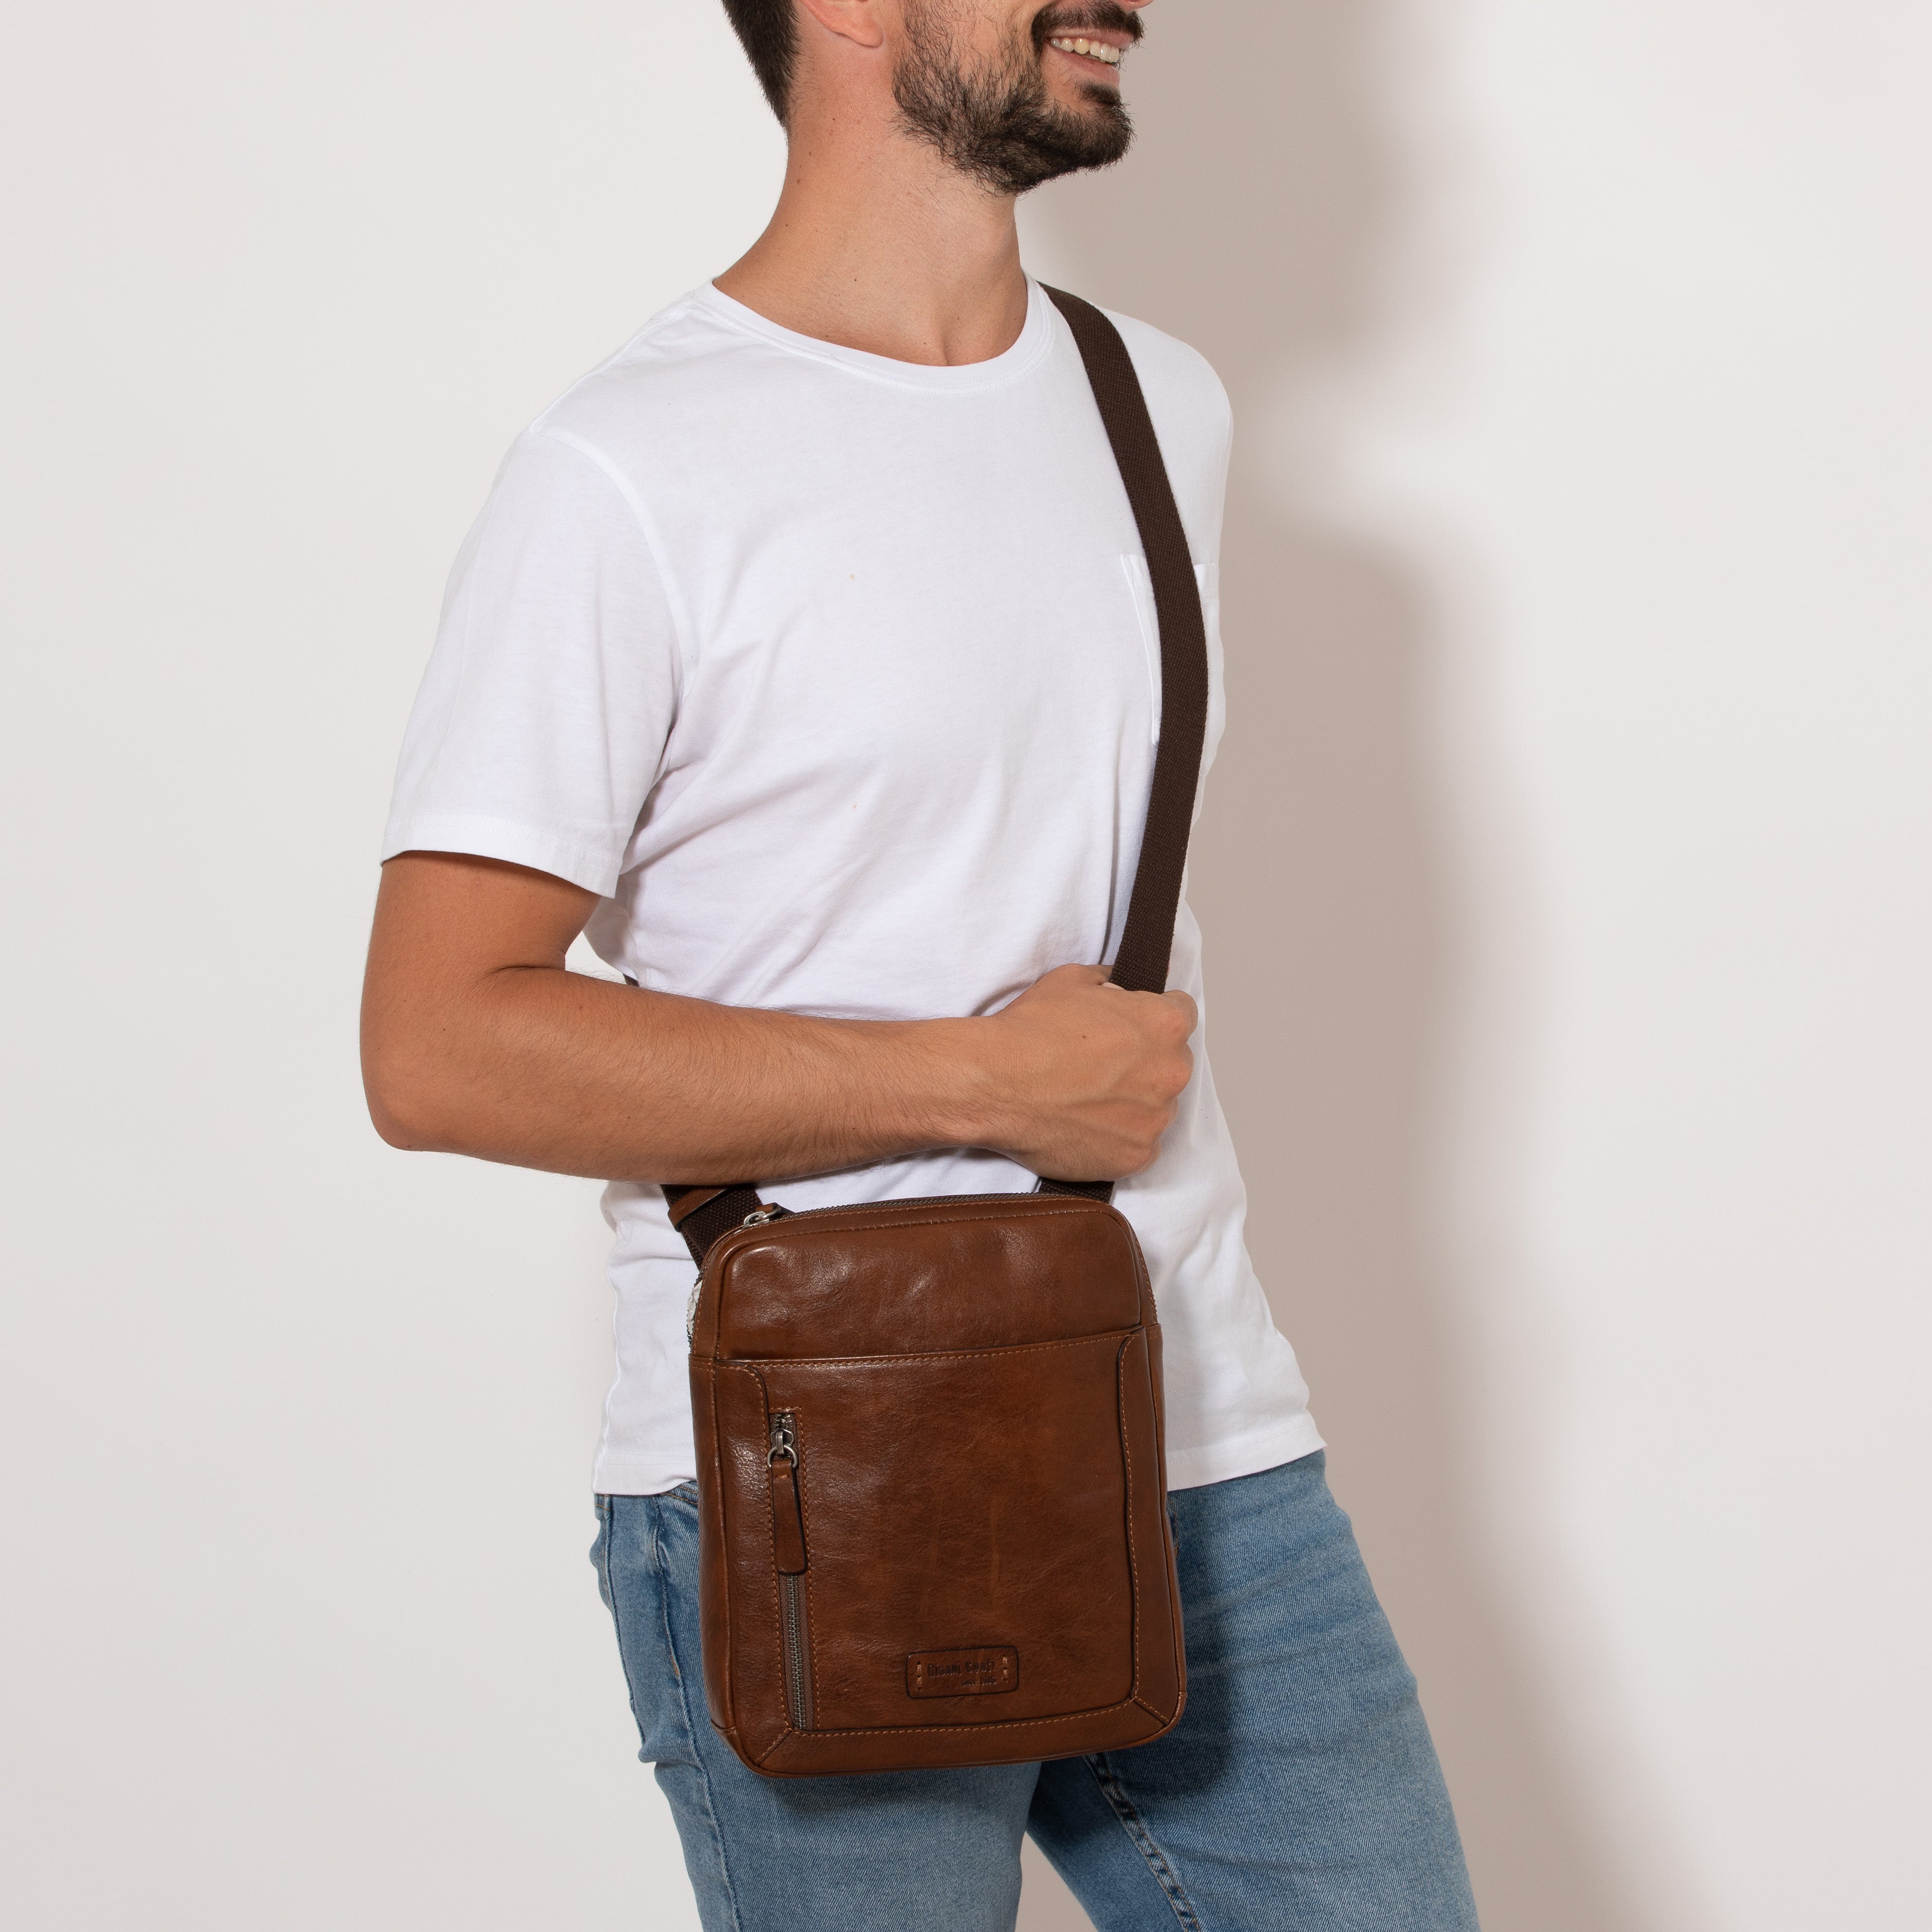 SIMONE by Gianni Conti - Vegetable-Tanned Leather Shoulder Bag